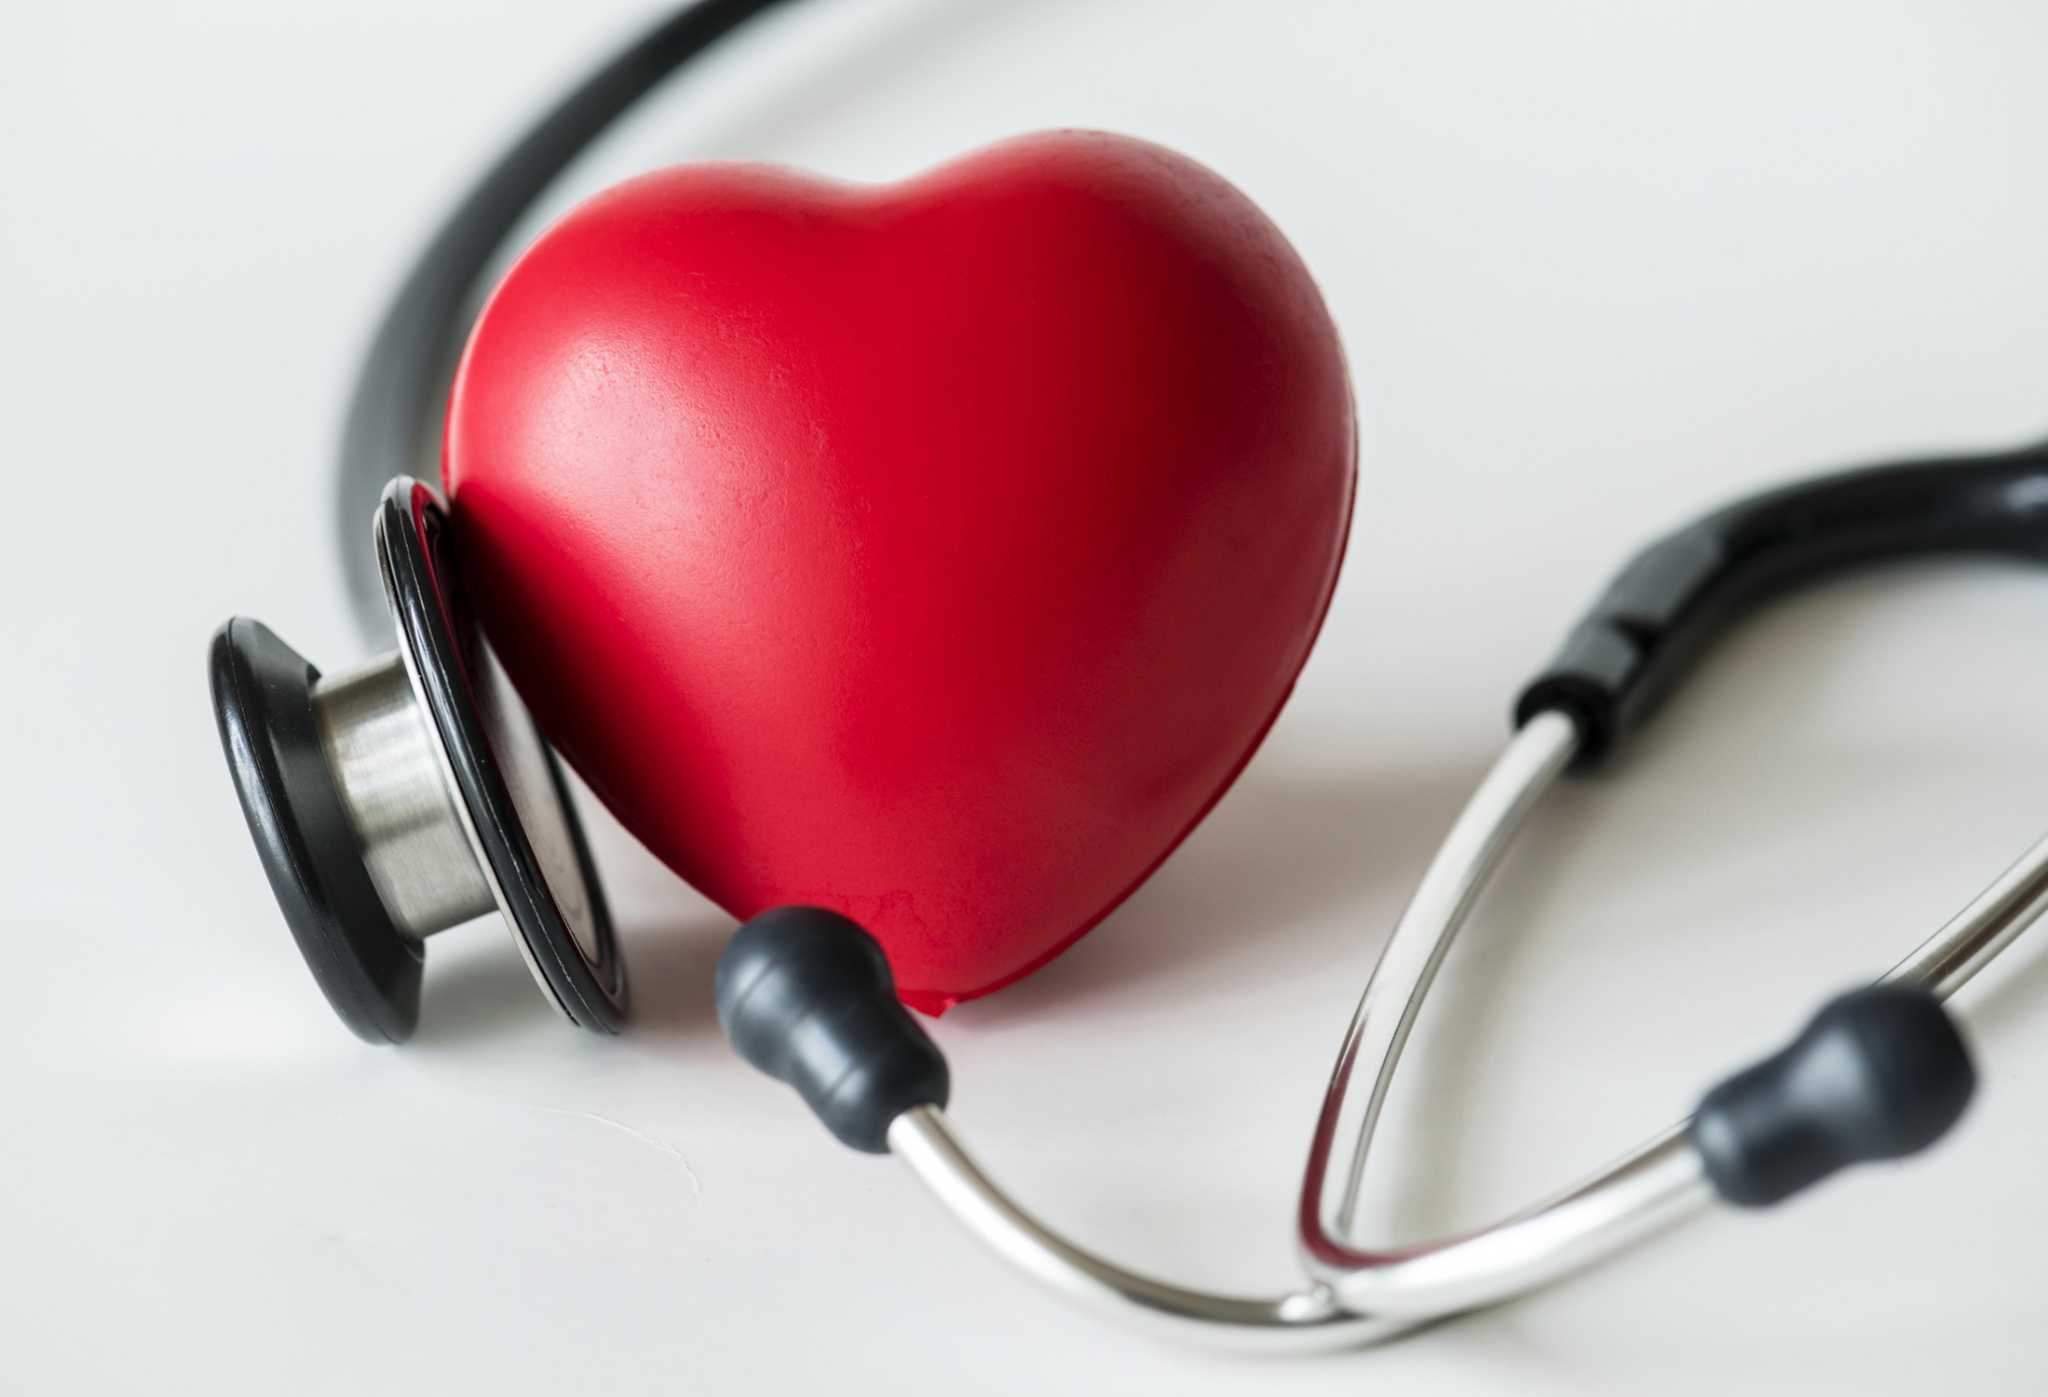 Slow heart rate recovery after exercise can be a telling sign